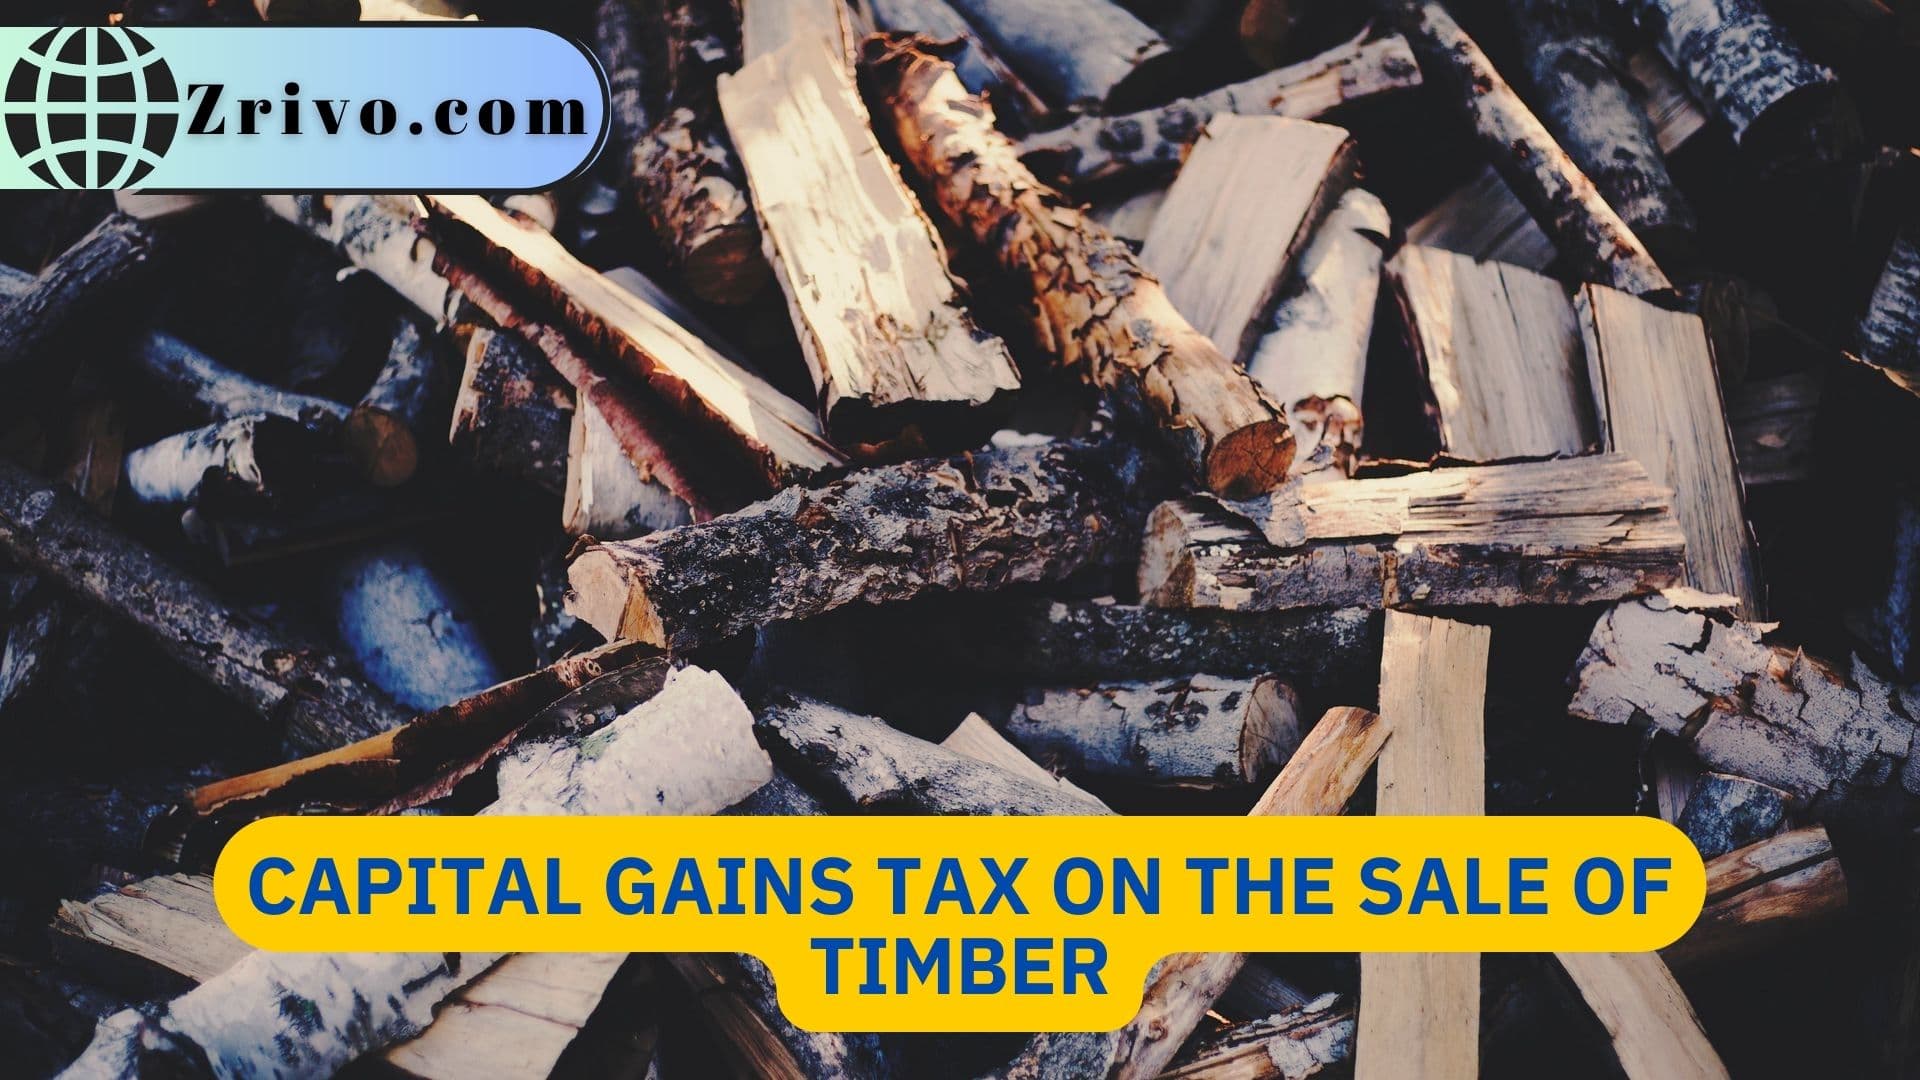 Capital Gains Tax on the Sale of Timber